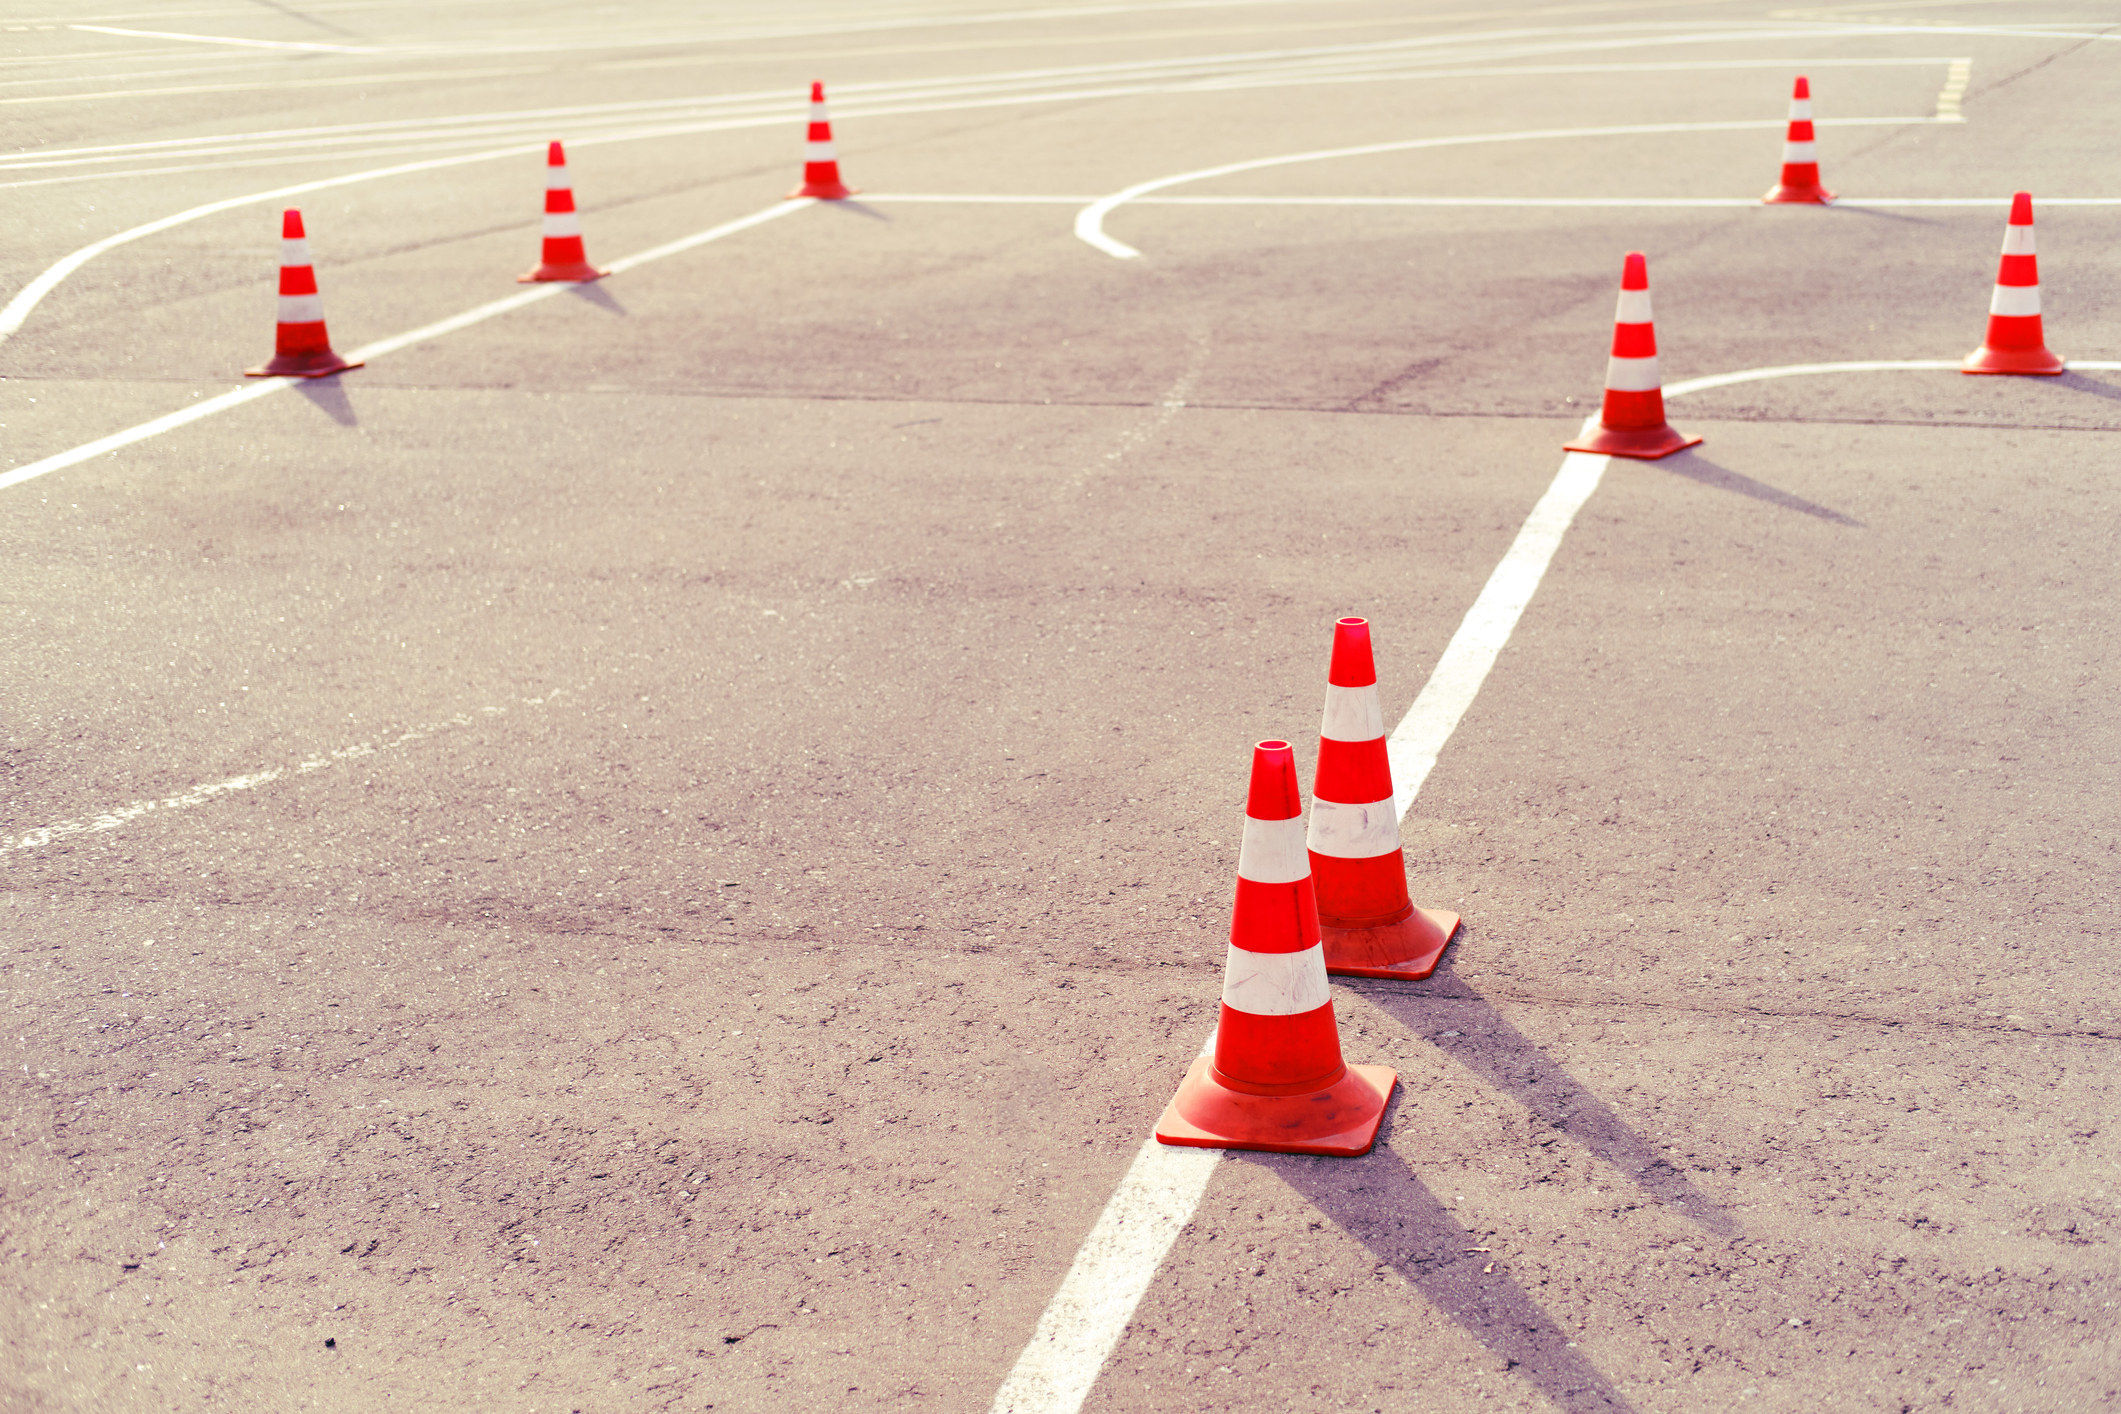 cones set up for a driving course